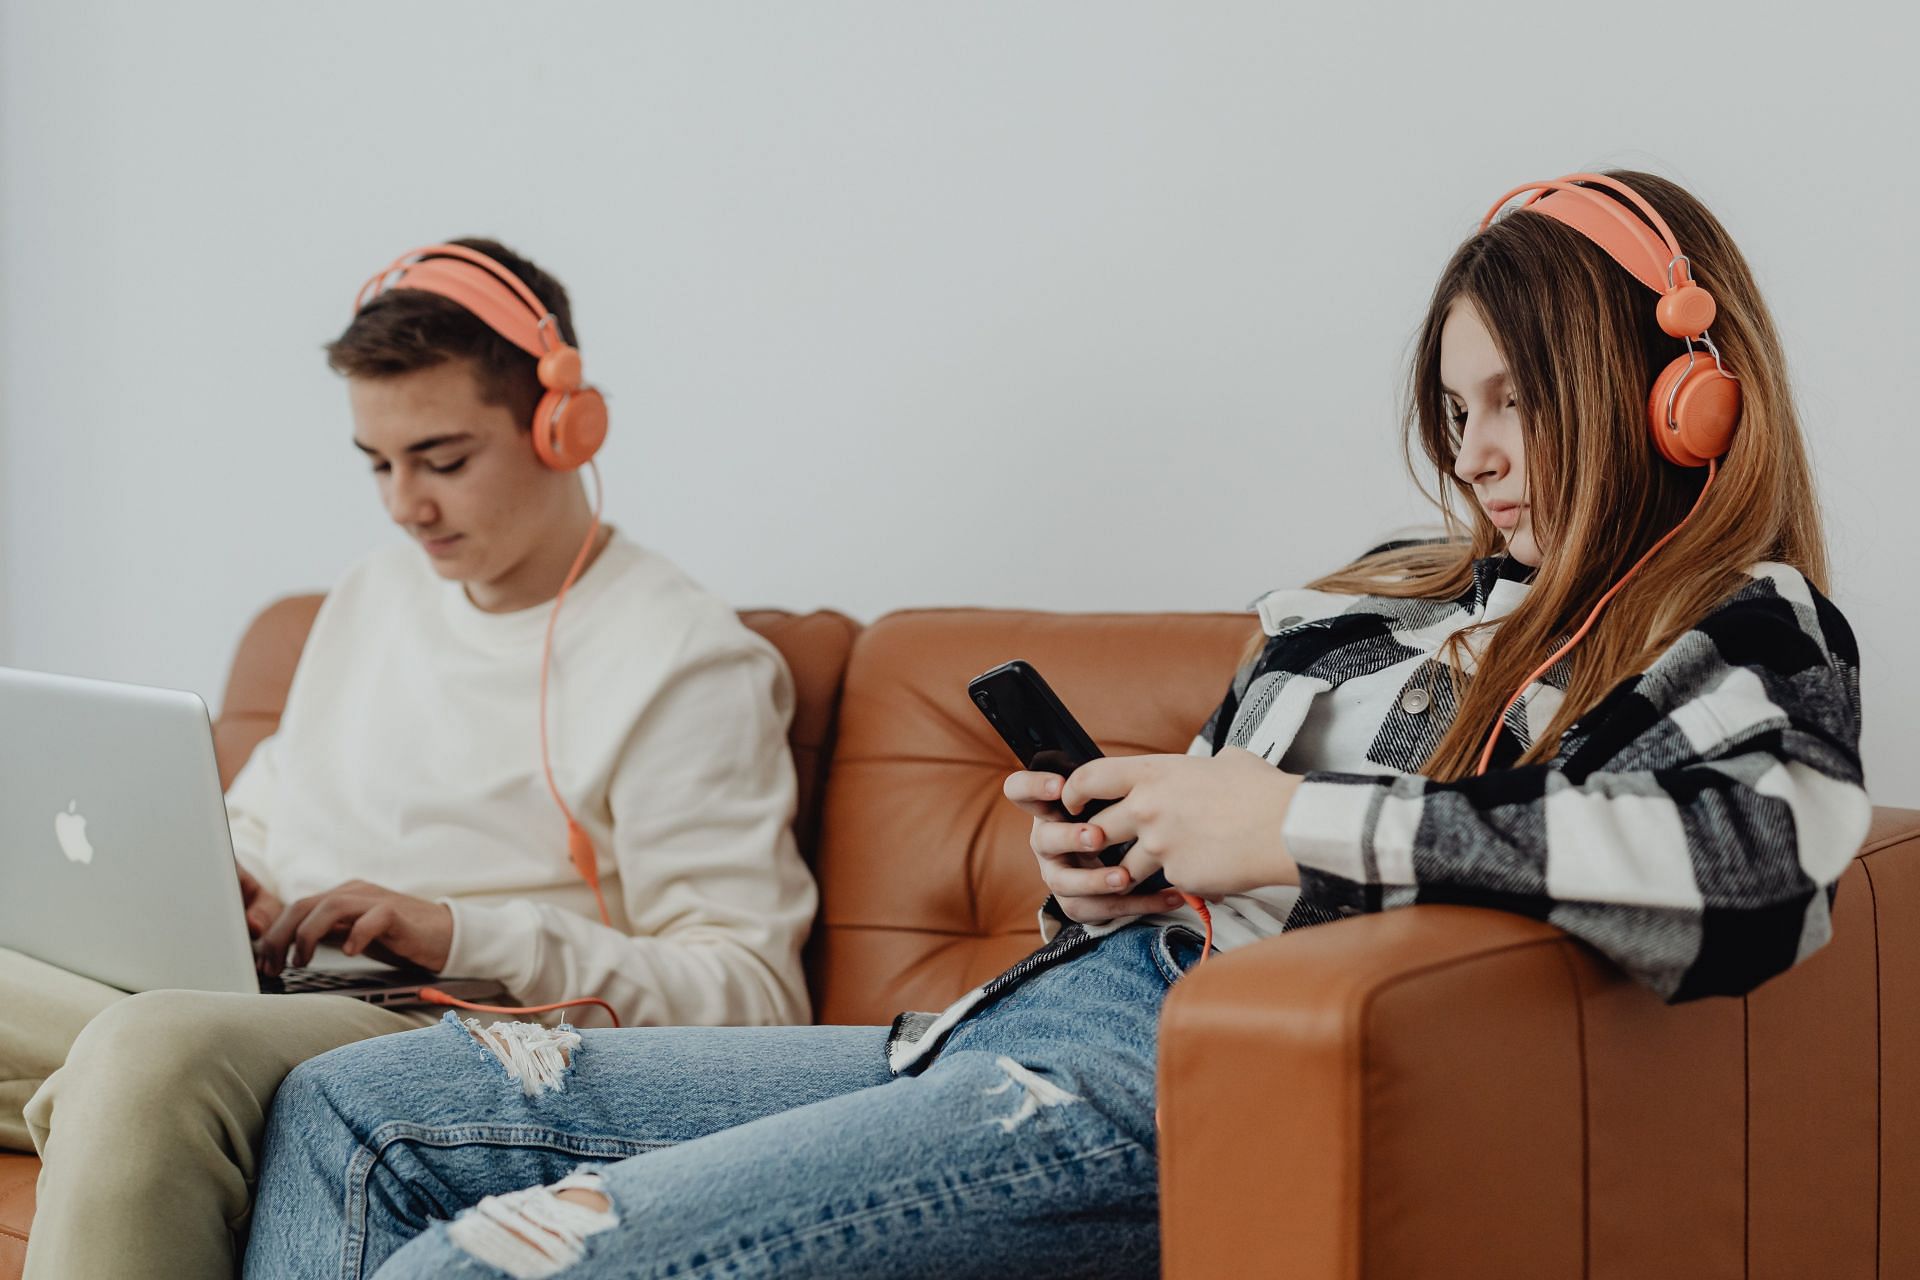 Internet addiction is not a diagnosable mental health condition and is among the top ten common mental illnesses in students. (Image via Pexels/ Karolina Grabowska)